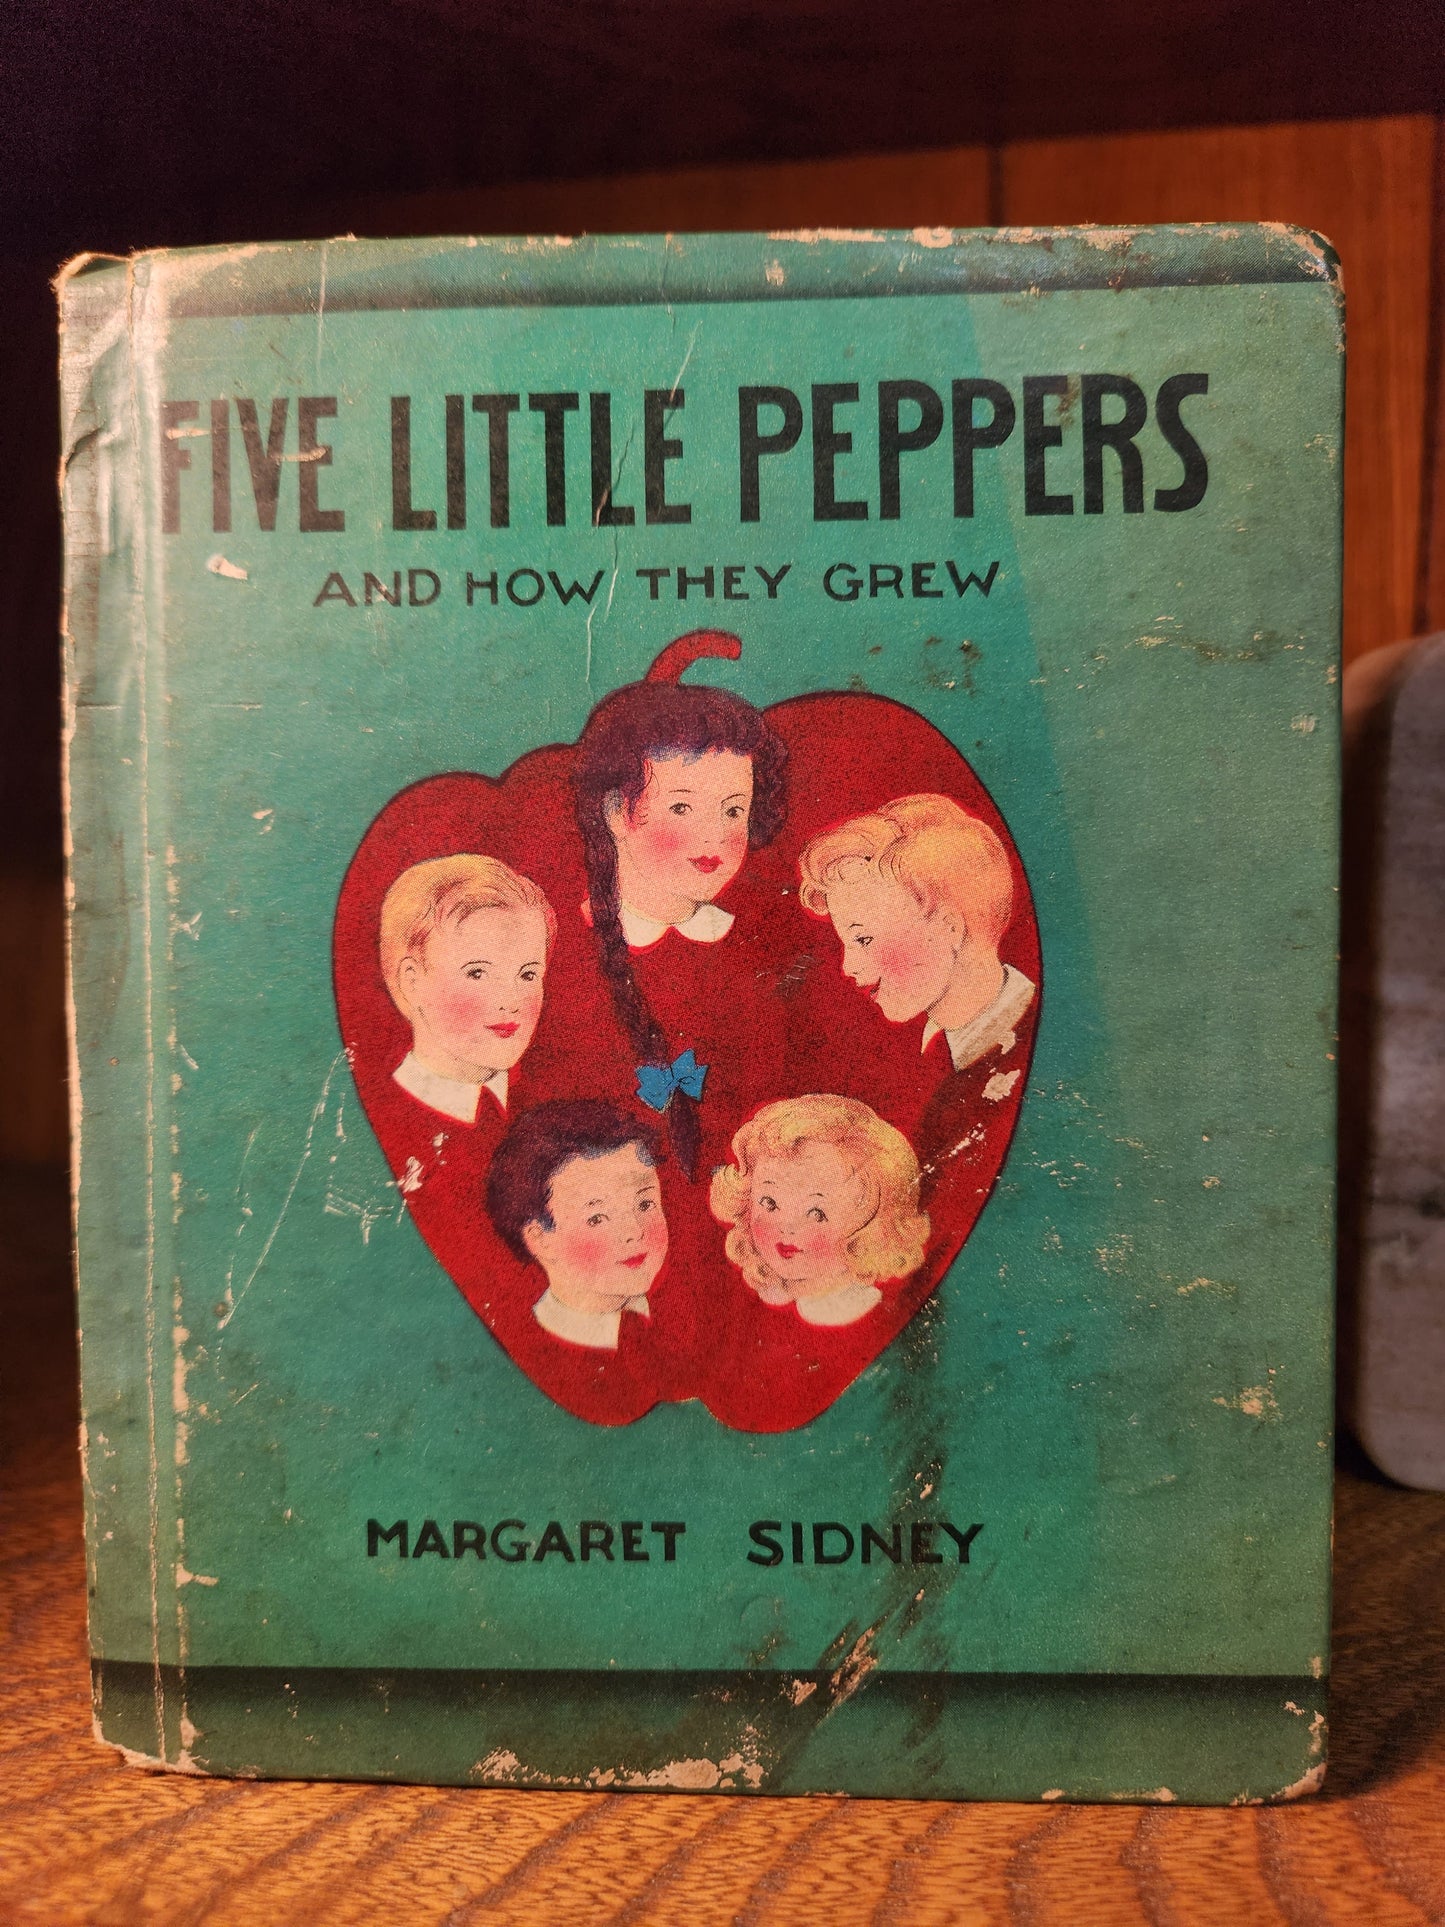 "The Five Little Peppers and How They Grew" by Margaret Sidney, 1938, adapted by Viola R. Lowe